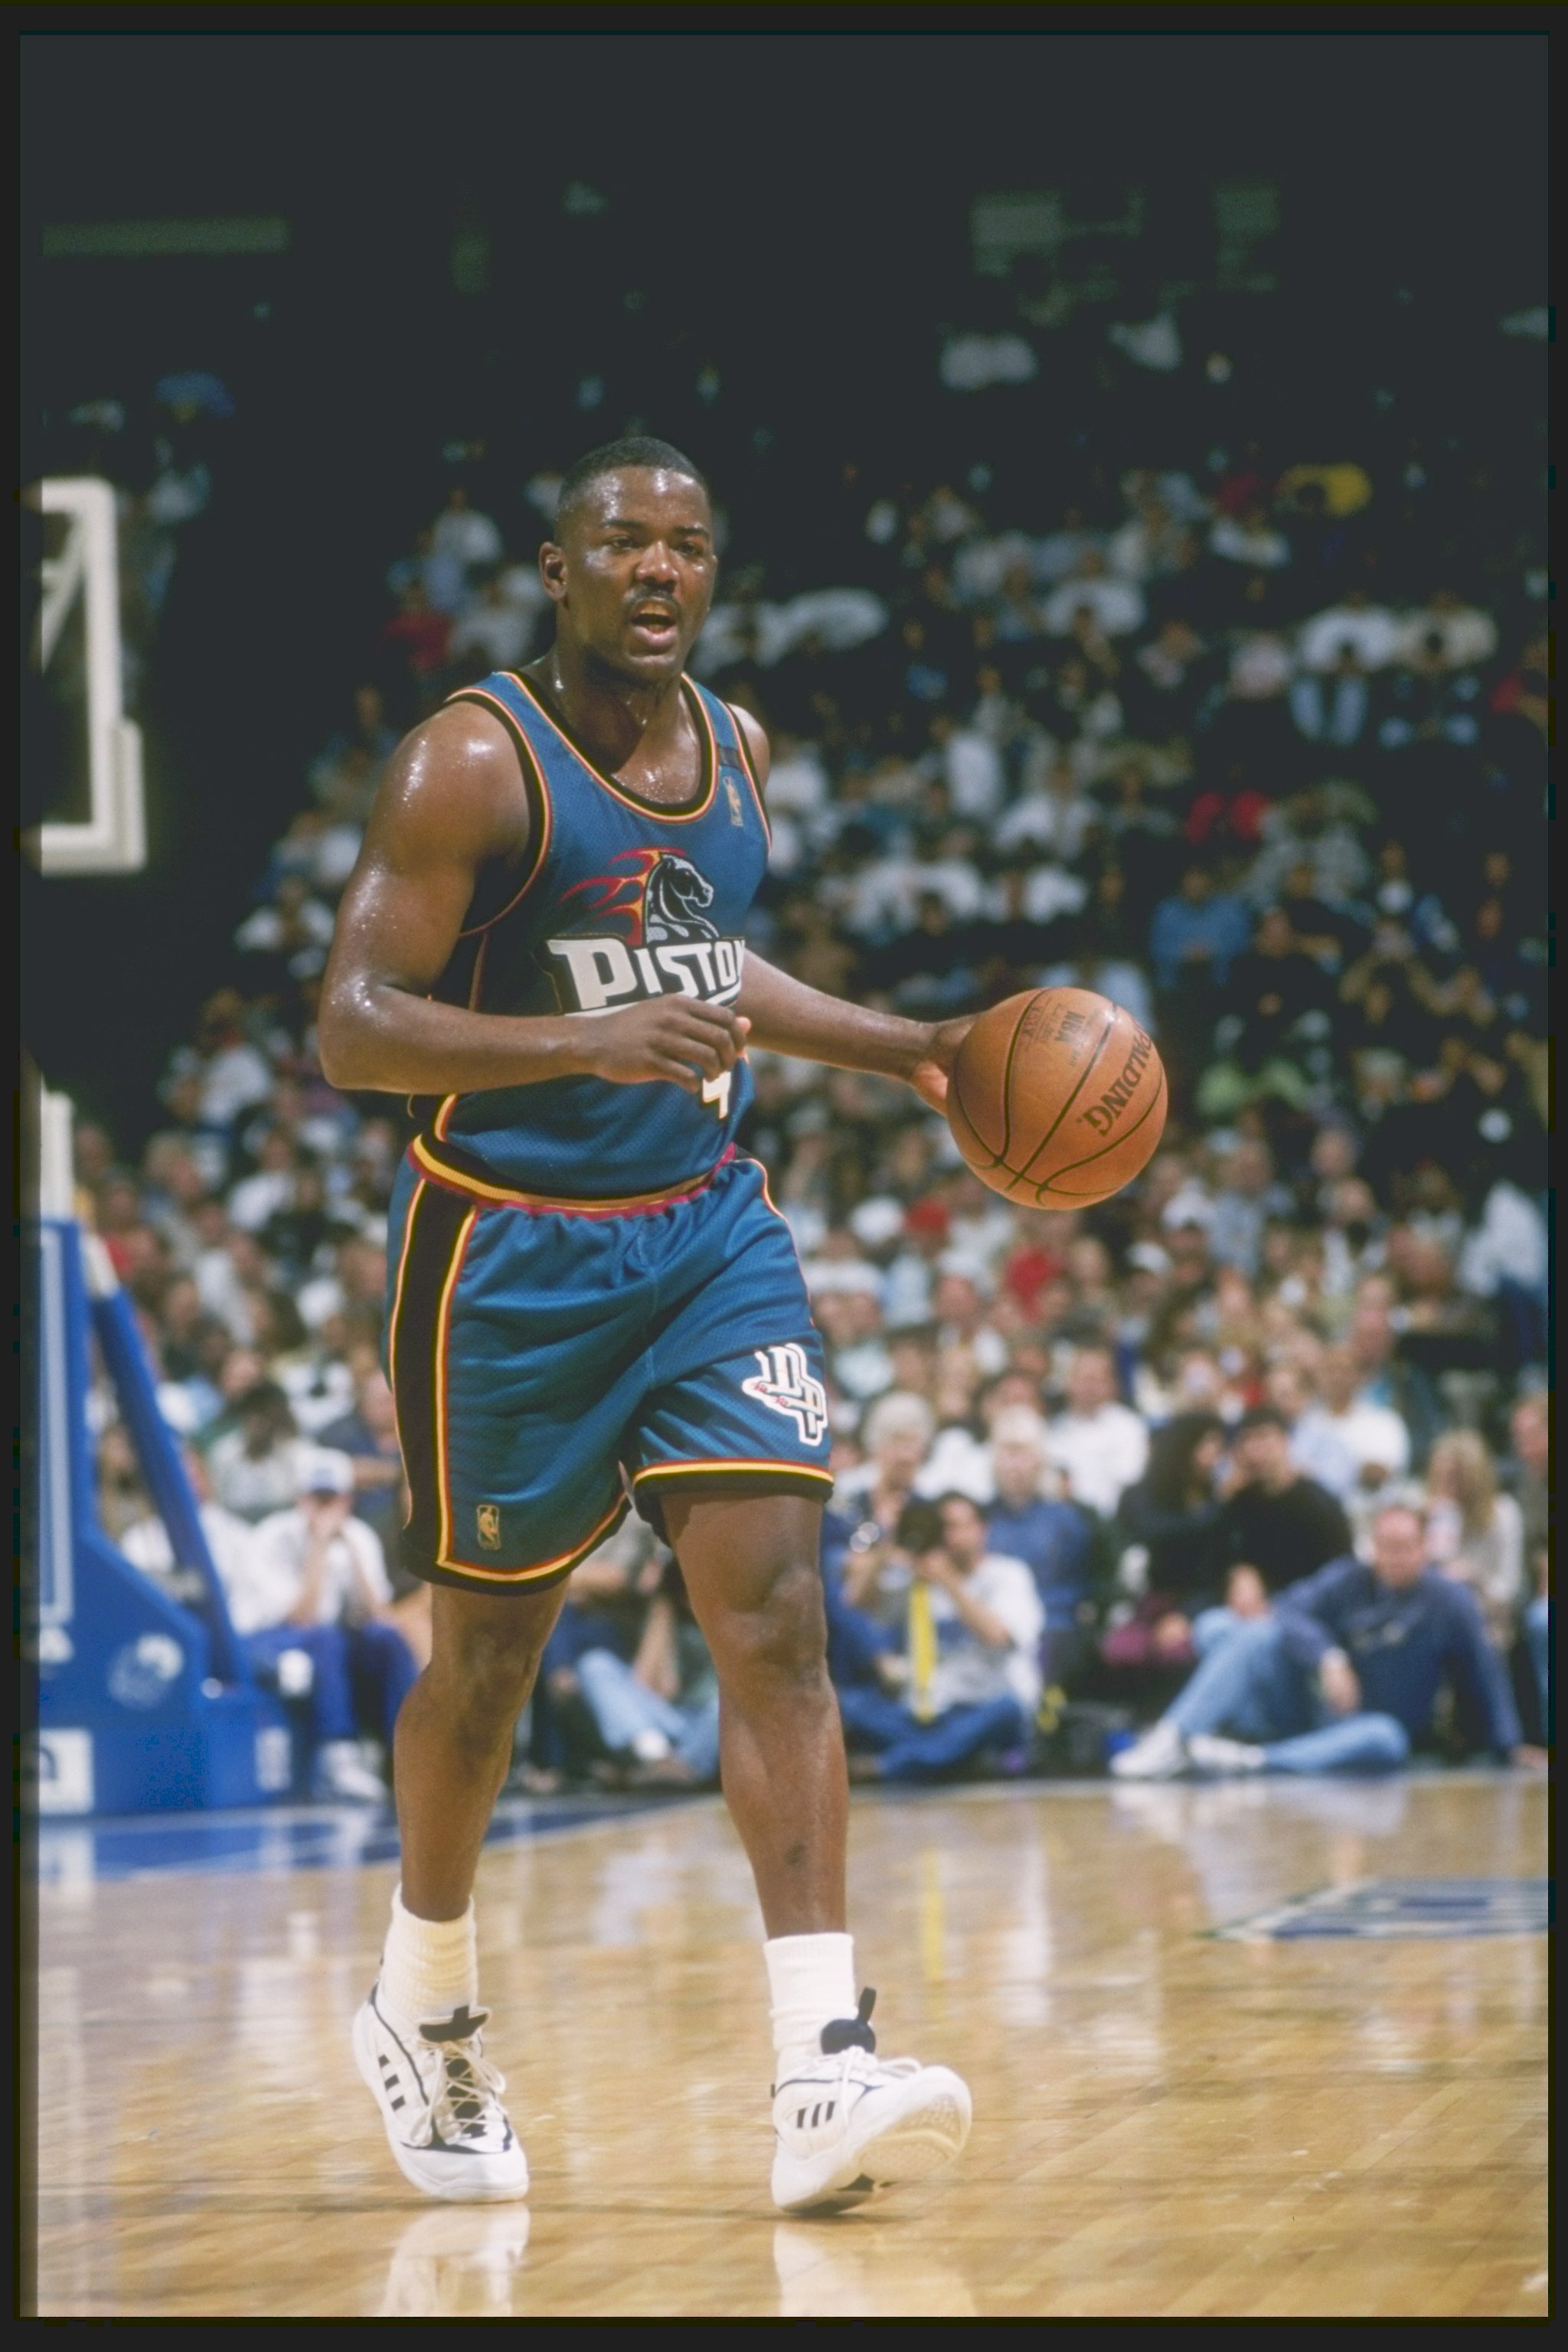 Joe Dumars Court Dedication: A Night to Remember and Honor the